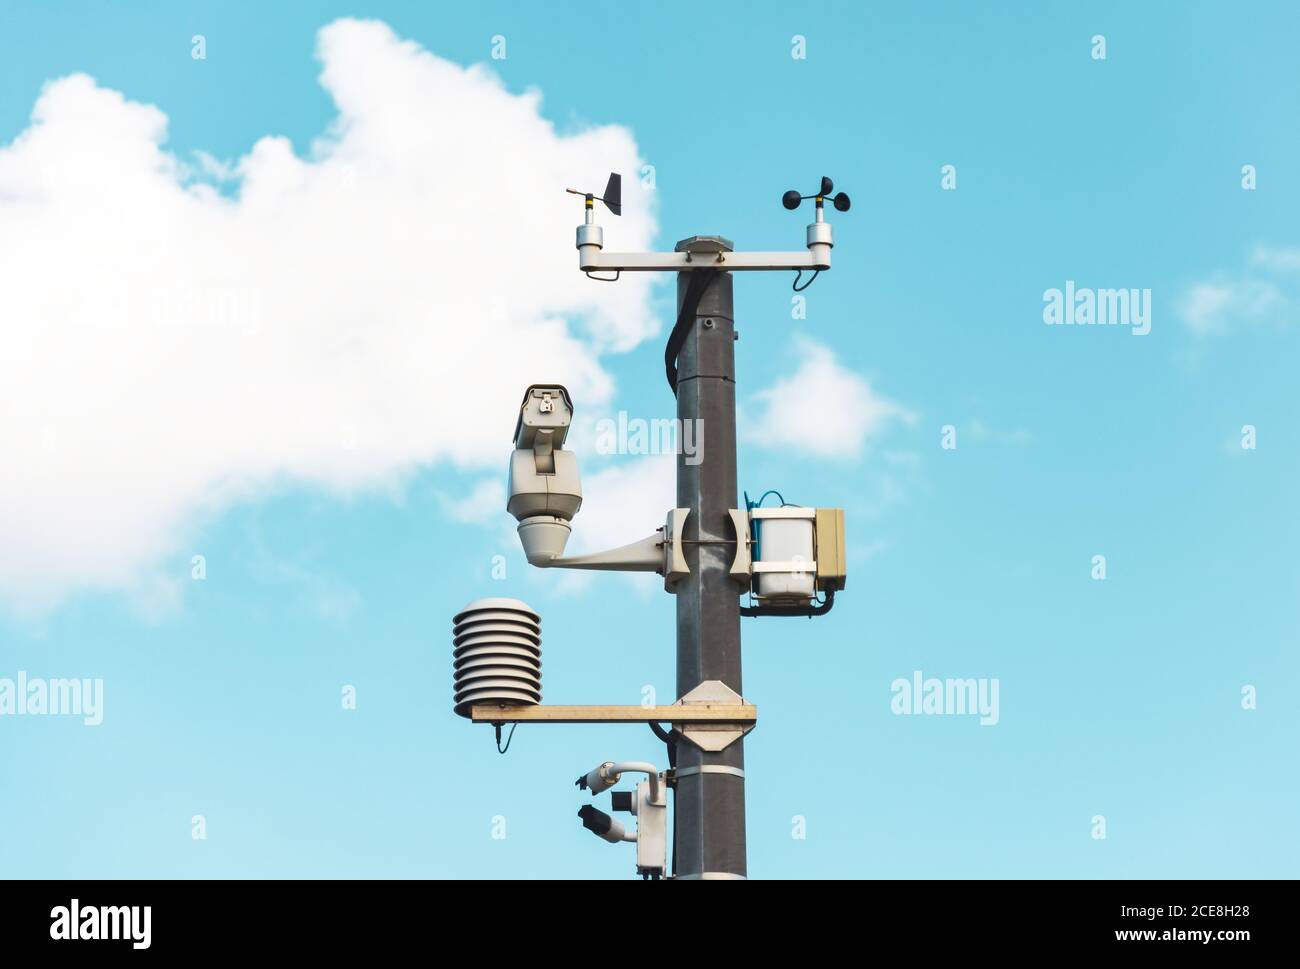 Automatic weather station, with a weather monitoring system and video cameras for observation. Against the background of blue sky clouds. Stock Photo